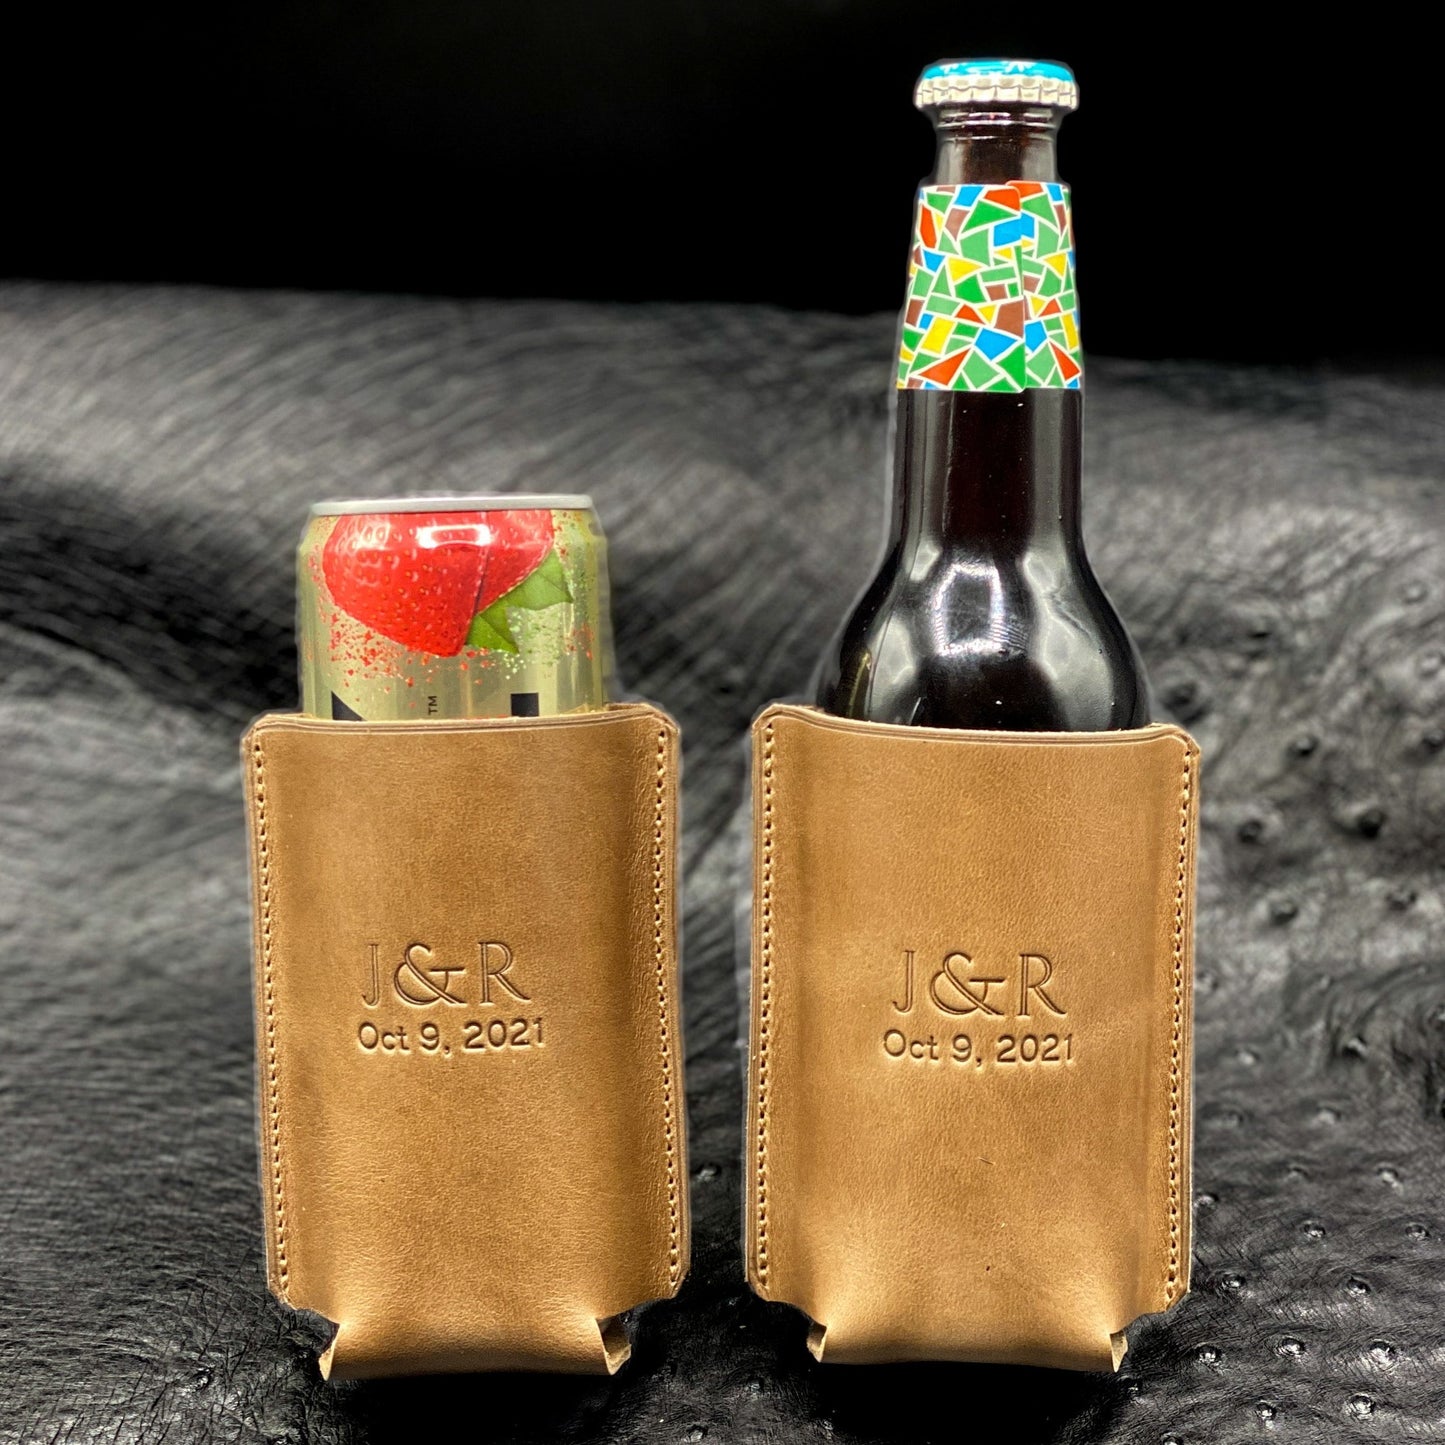 Couples Leather Drink Koozies in Natural CXL Horween Leather